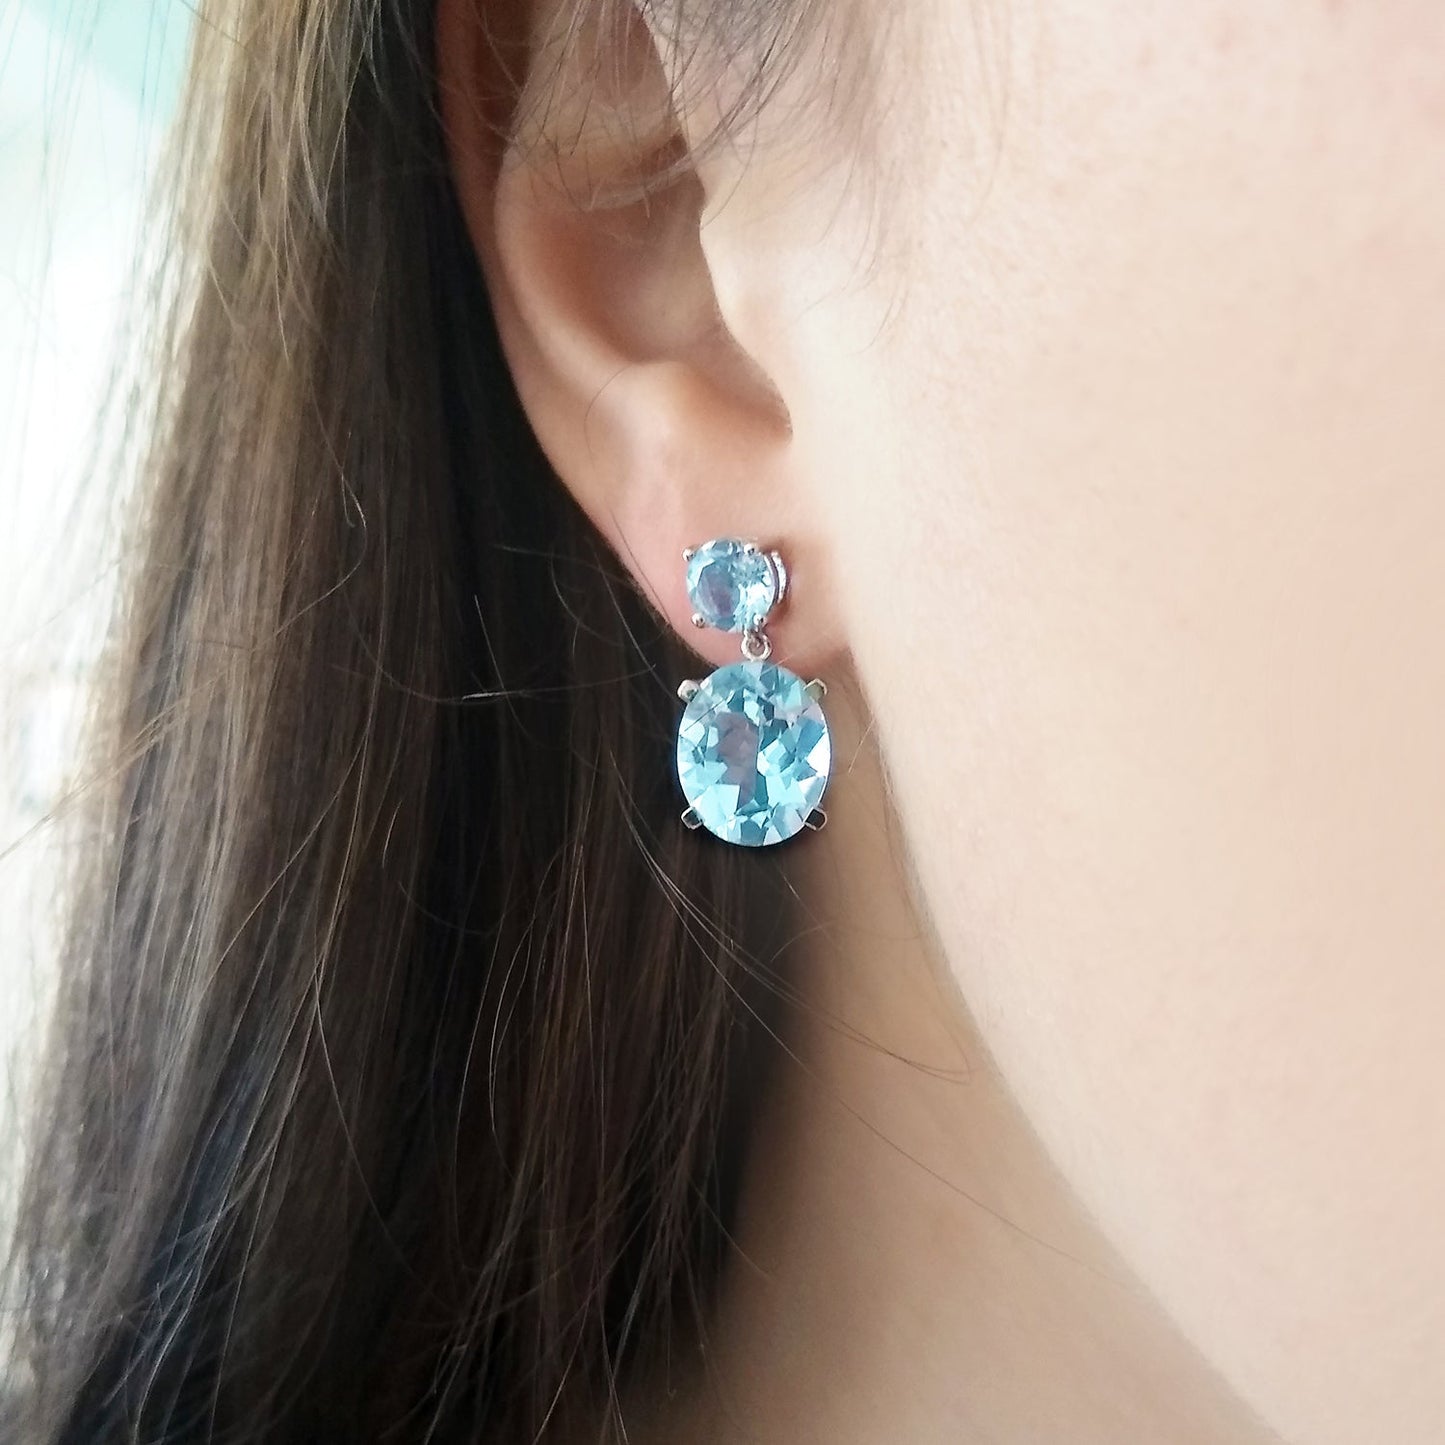 Load image into Gallery viewer, Sky Blue Topaz Silver Drop Earrings | The South of France Collection | Augustine Jewels | Gemstone Earrings
